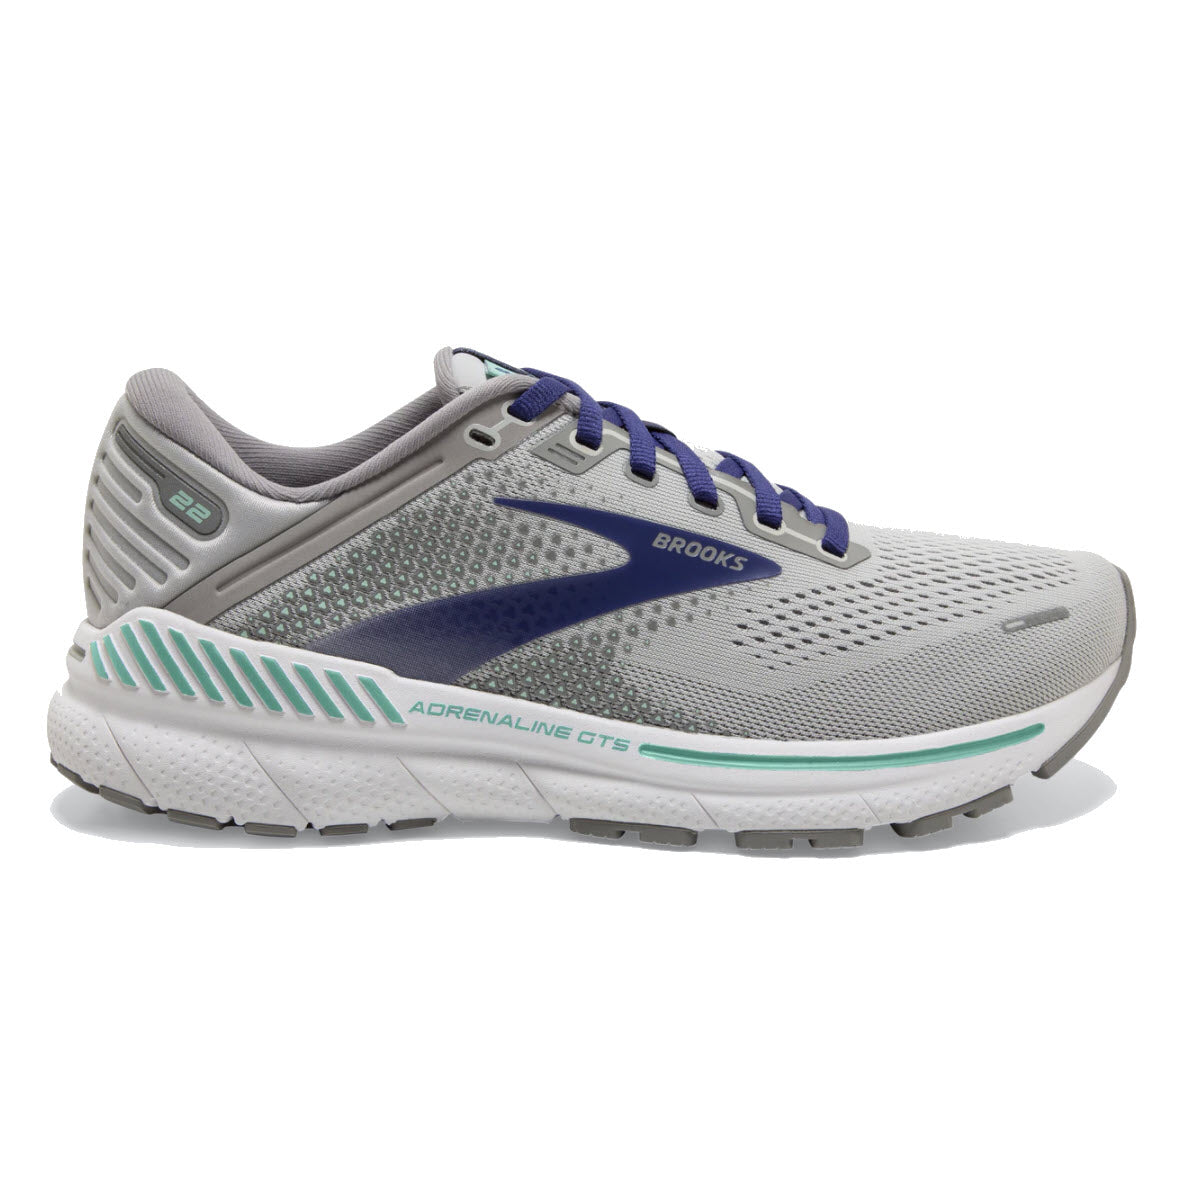 Side view of a Brooks Adrenaline GTS 22 alloy/blue/green running shoe.